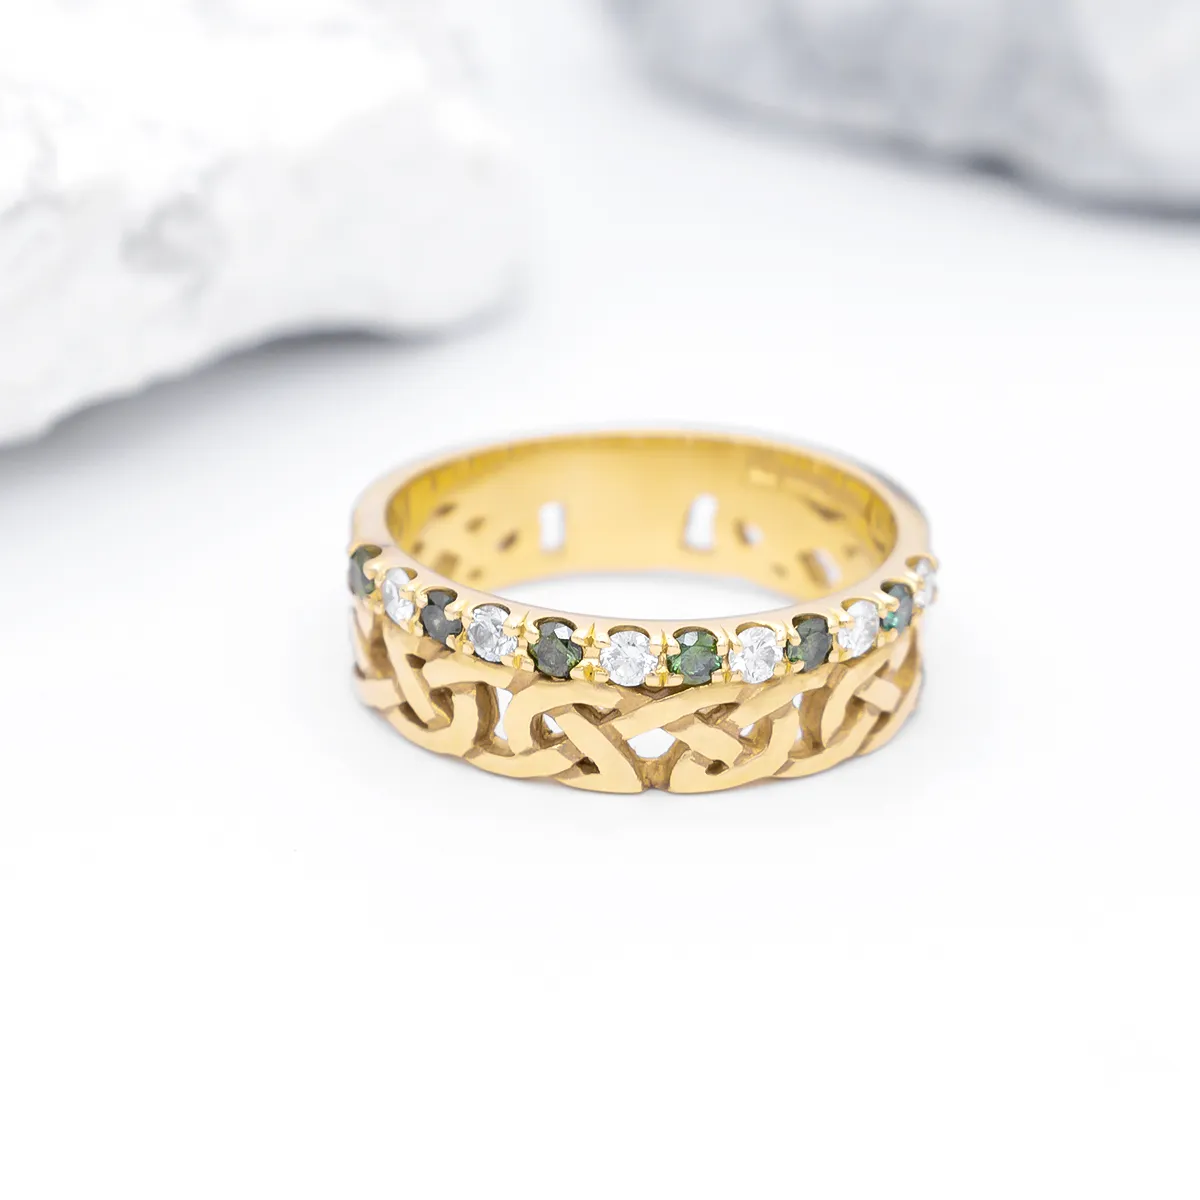 Gold Celtic Knot Ring With Diamonds...